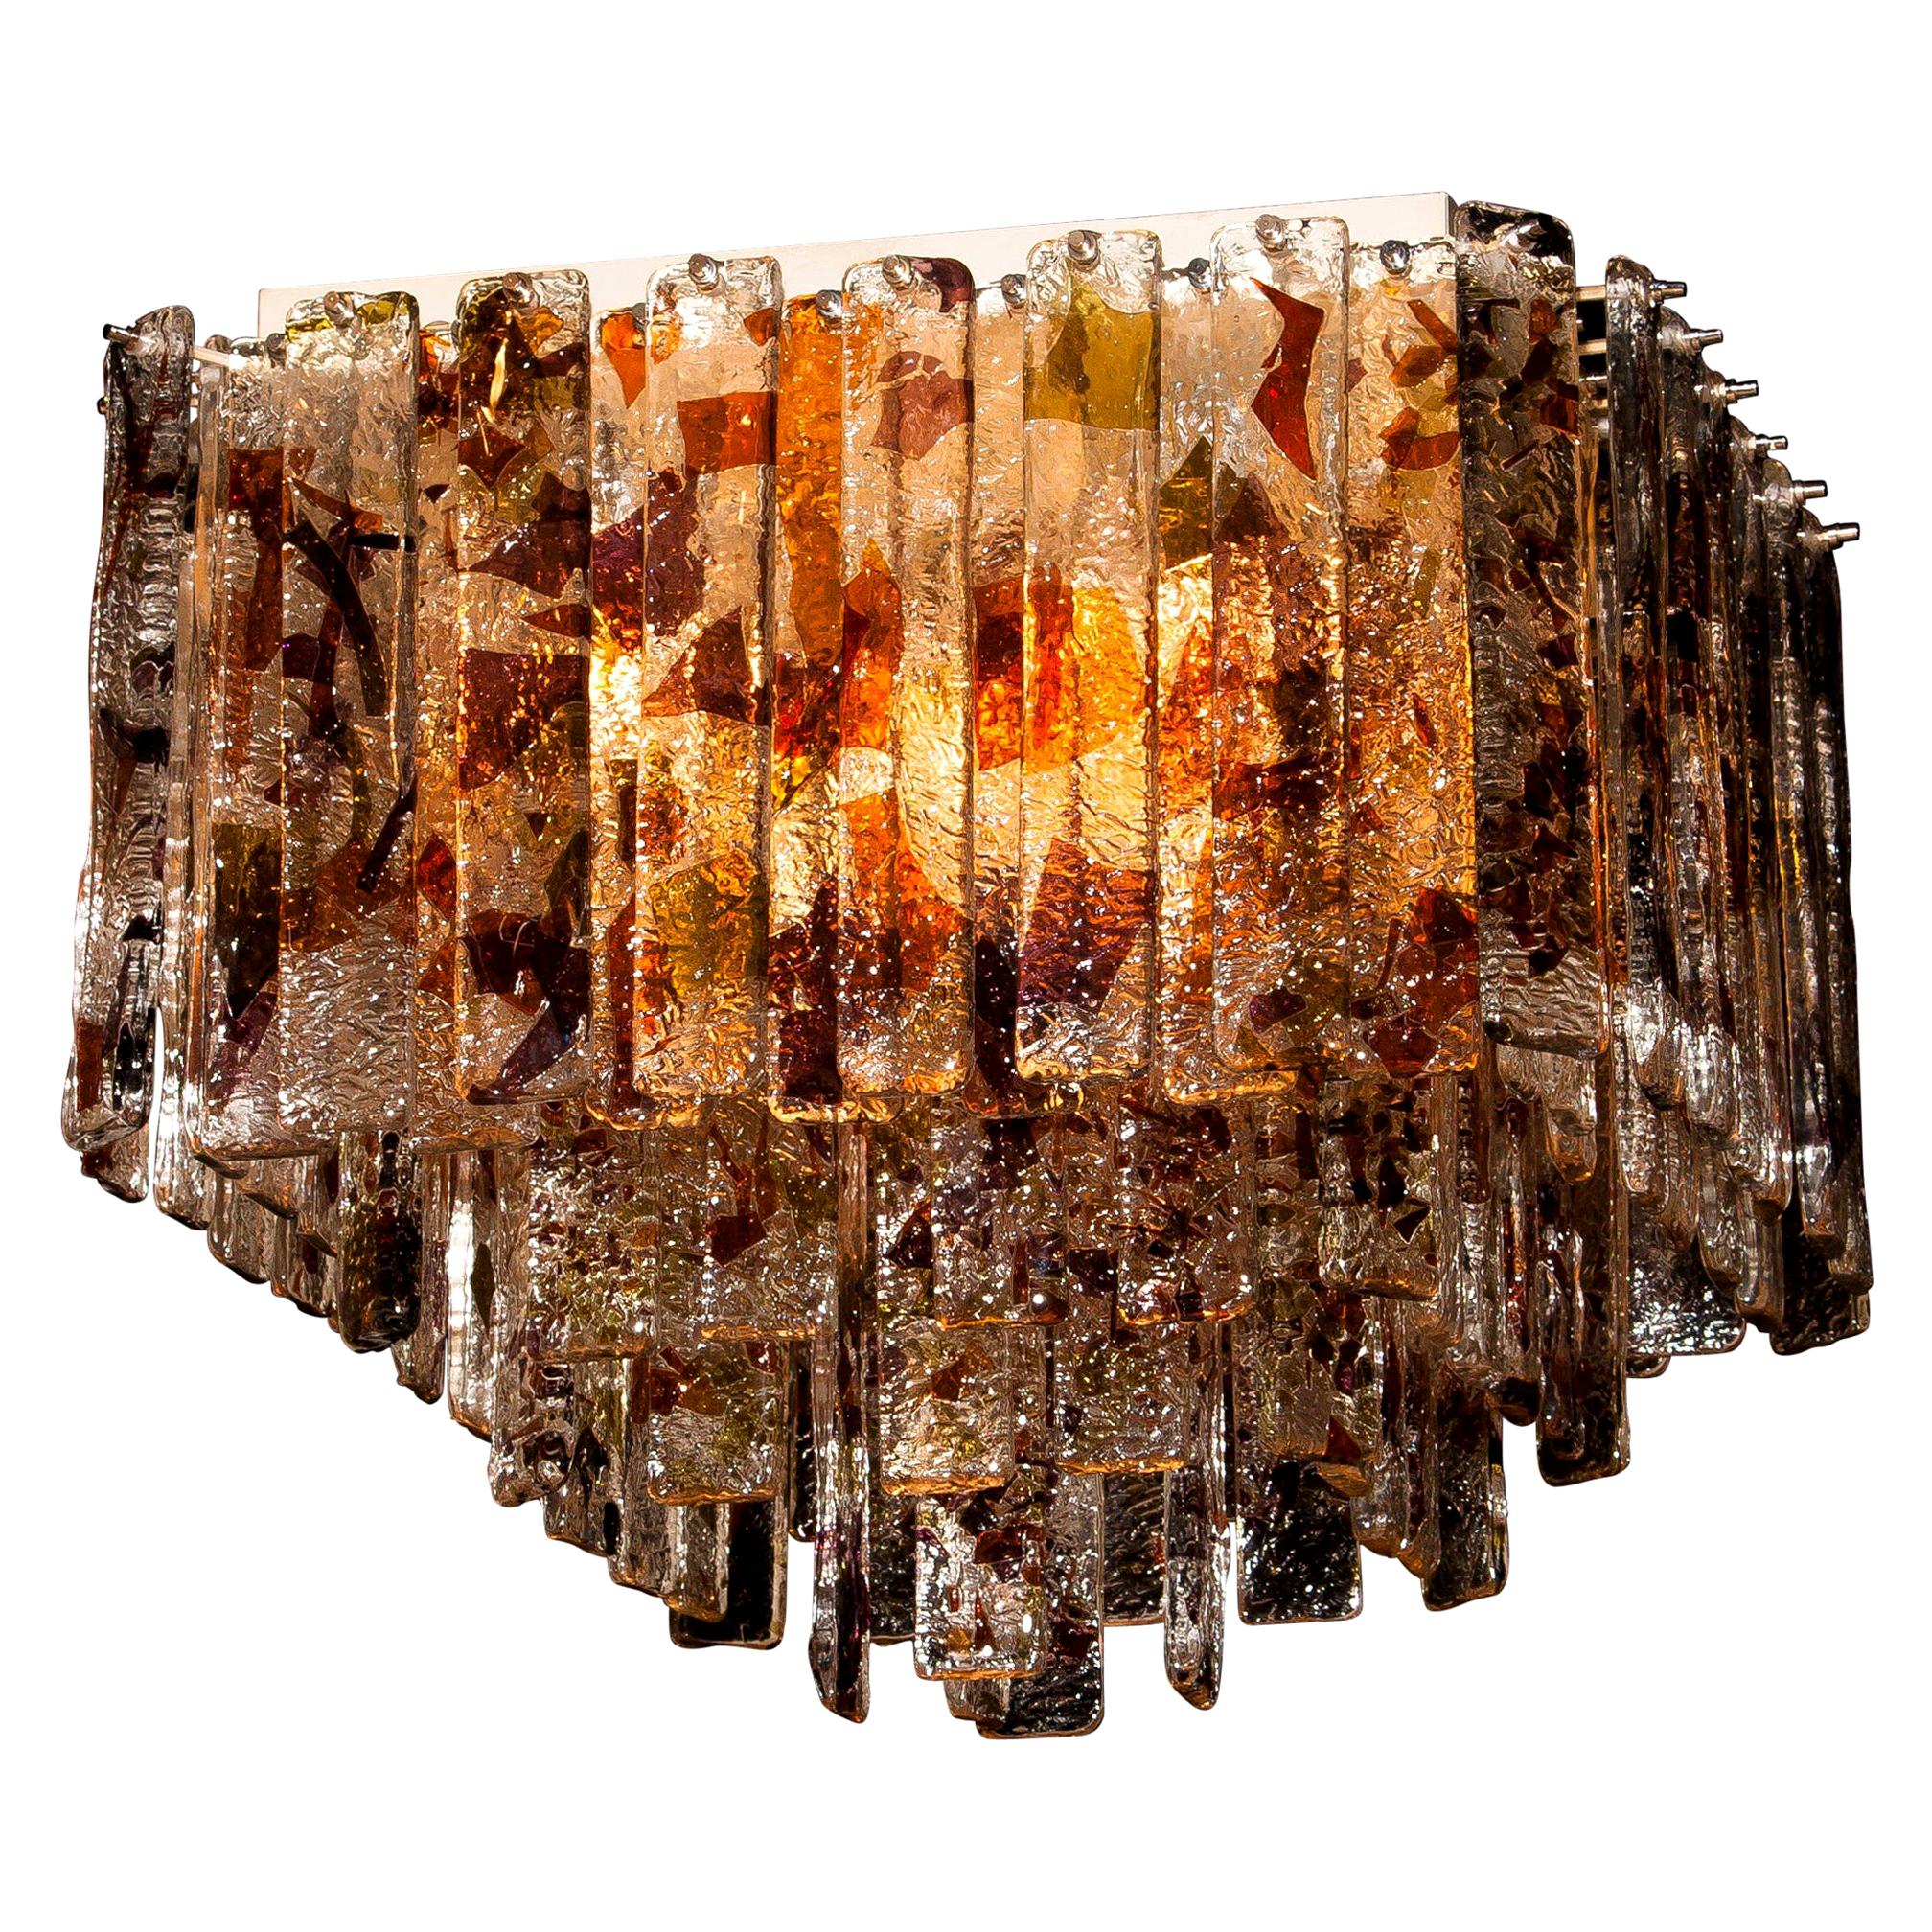 Stunning Italian Mid-Century Modern squared ceiling lamp by Mazzega.
95 pieces of clear crystal elements measuring: 28 cm each.
The glass hangs on hooks and pins on to a white lacquered metal frame, as pictured.
The elements have three colors